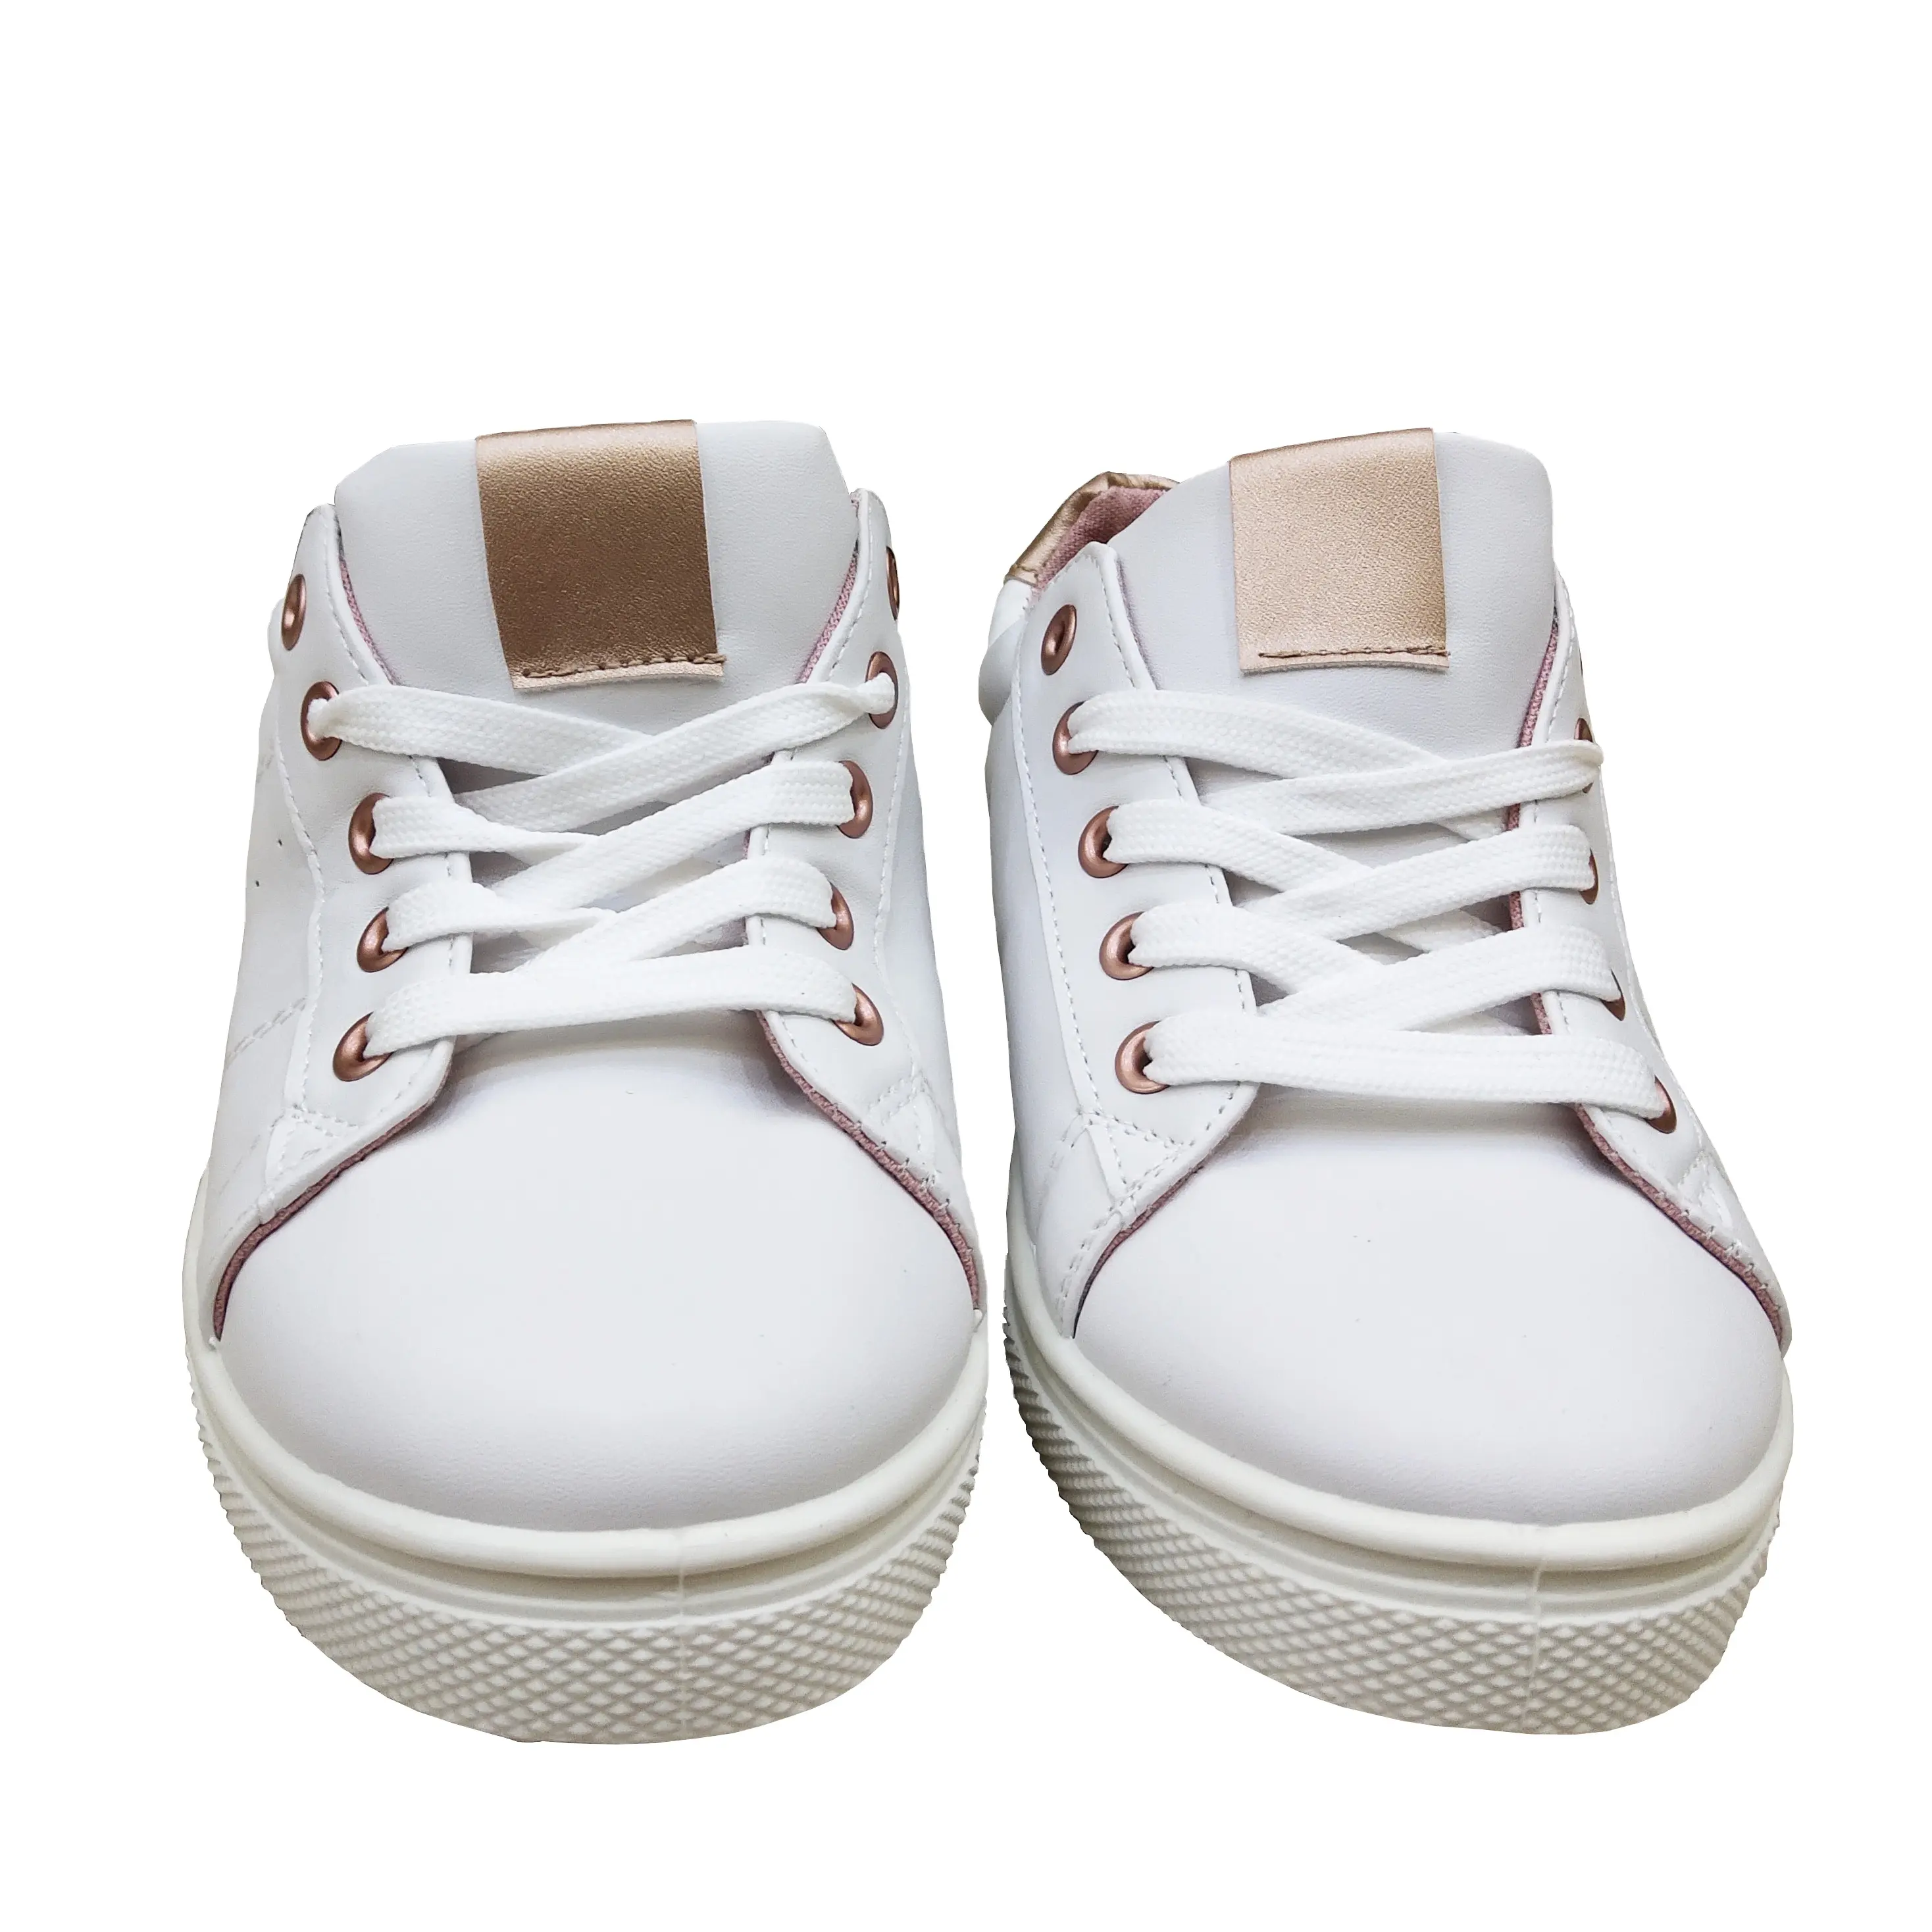 Shoes Children's Shoes Girls And Boys Sneakers Casual Children Casual School Shoes Kids Stock